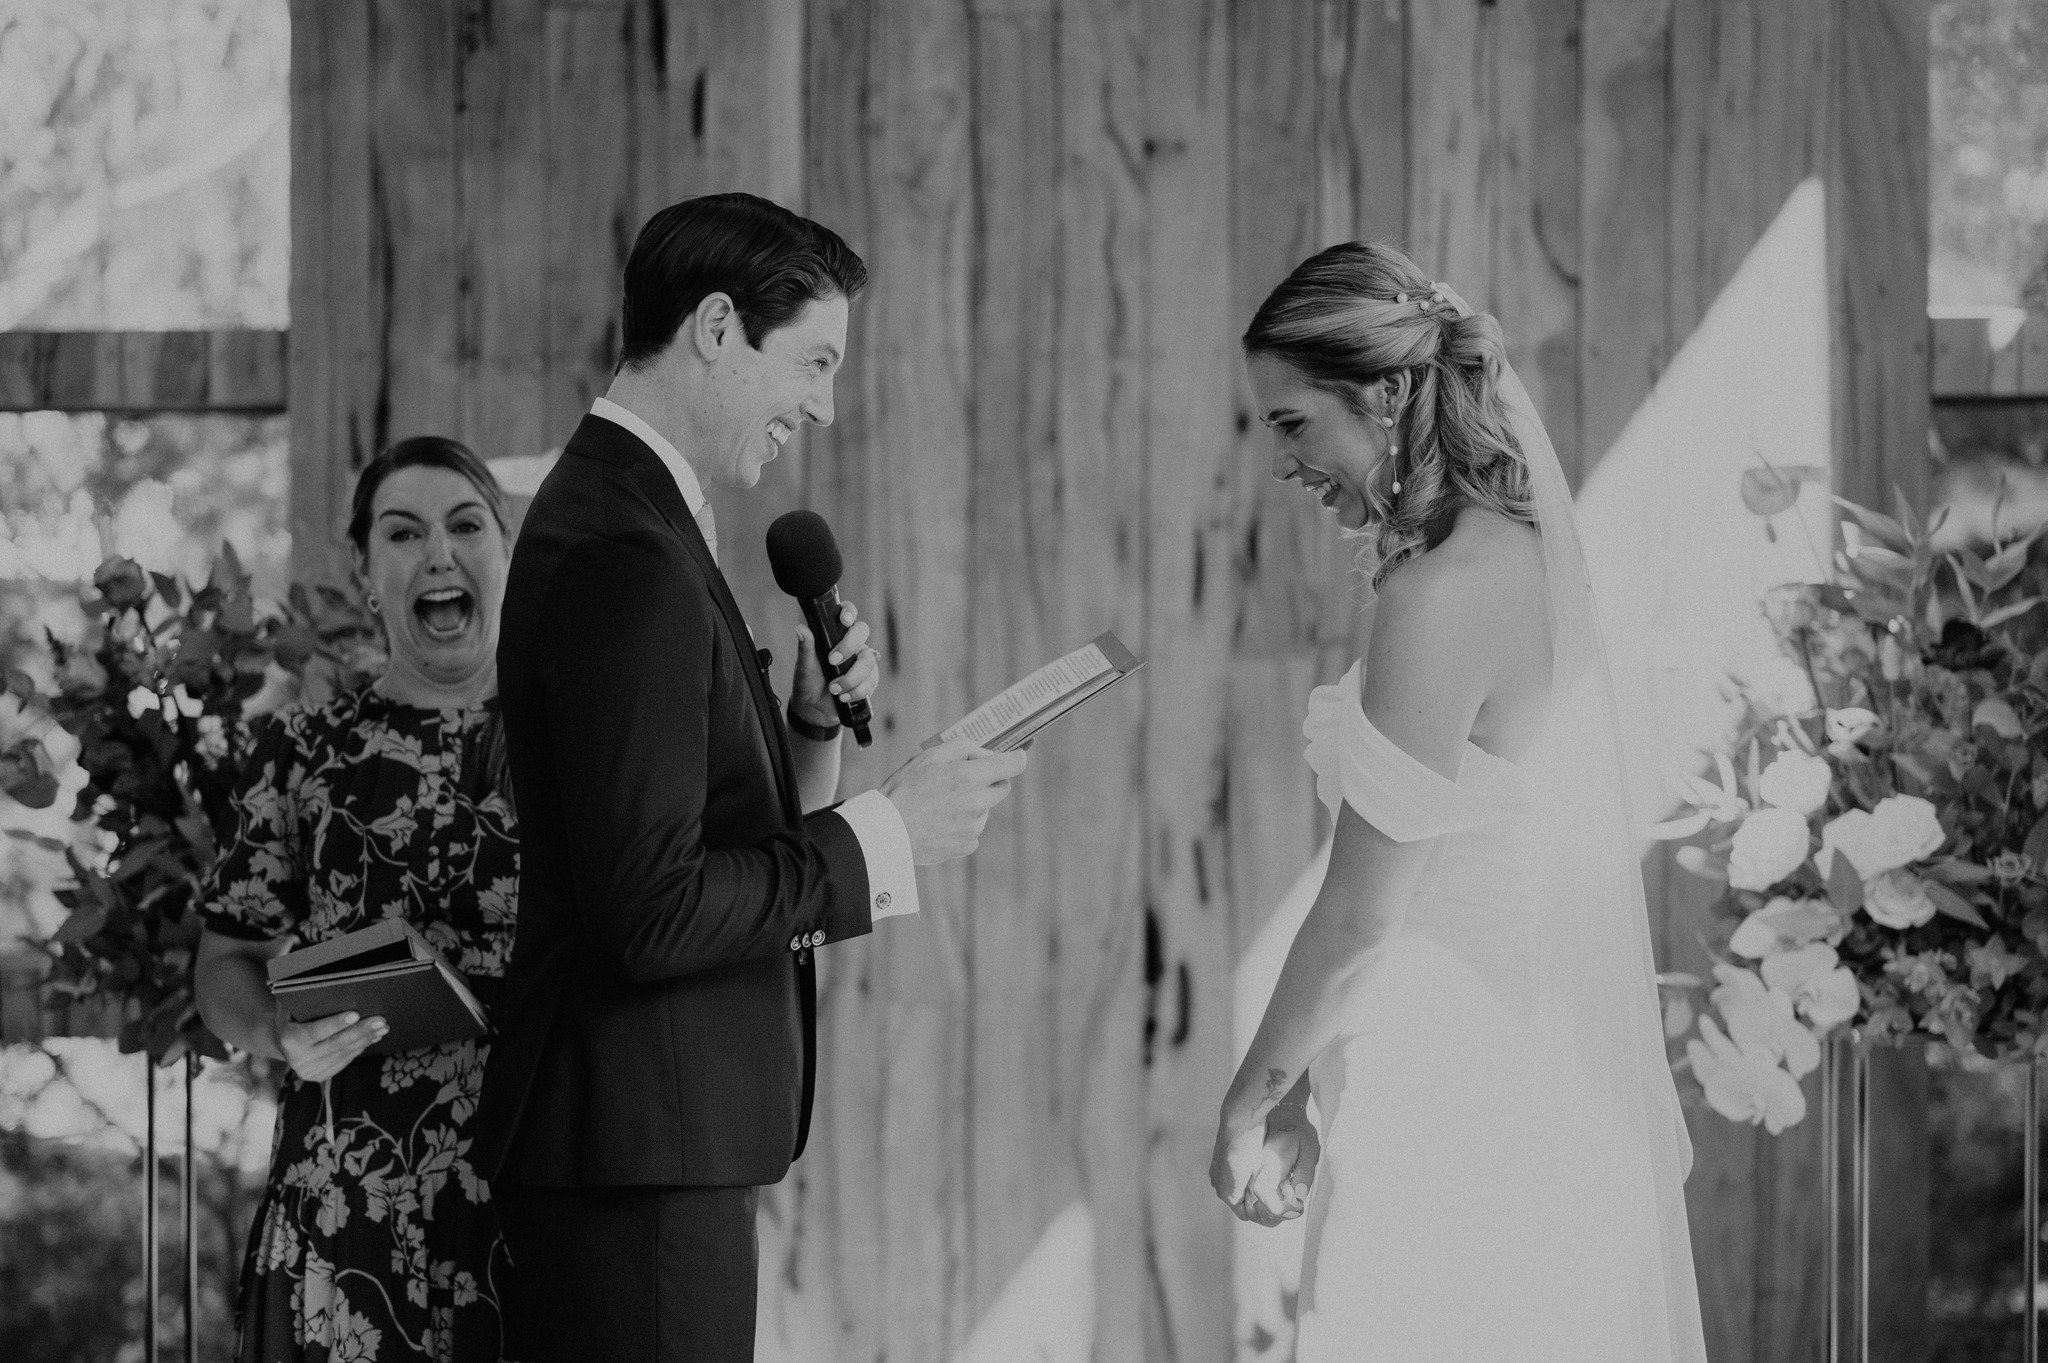 Is this a flattering photo of me? No.
But it is a BRILLIANT capture by @taylahjaydephotoweddings which shows the absolute rollercoaster of emotions everyone was feeling during Zac's vows to Kc.

And you know what? I had read these vows in advance and